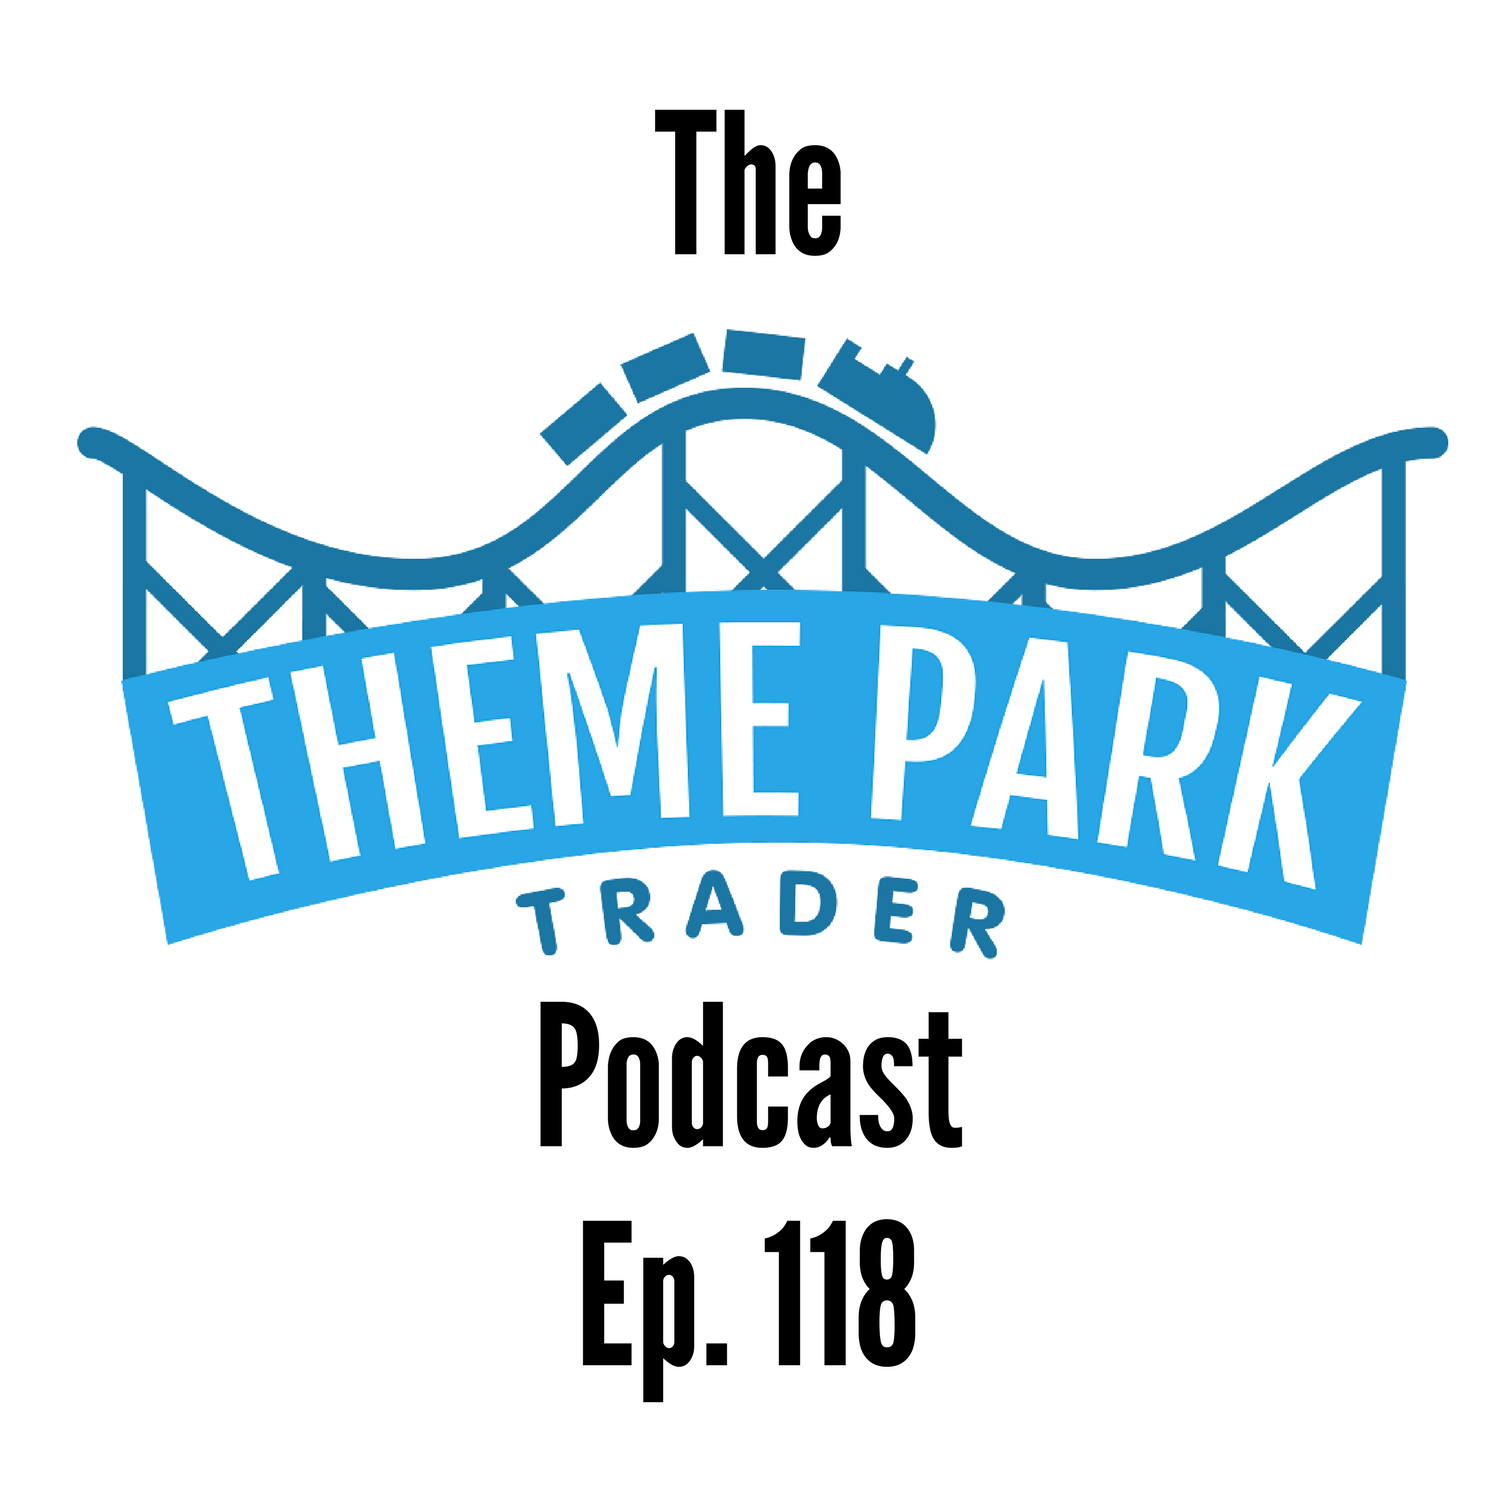 Episode 118 - We Chat About Our Orlando 2018 Plans Including Park Days and ADRs!